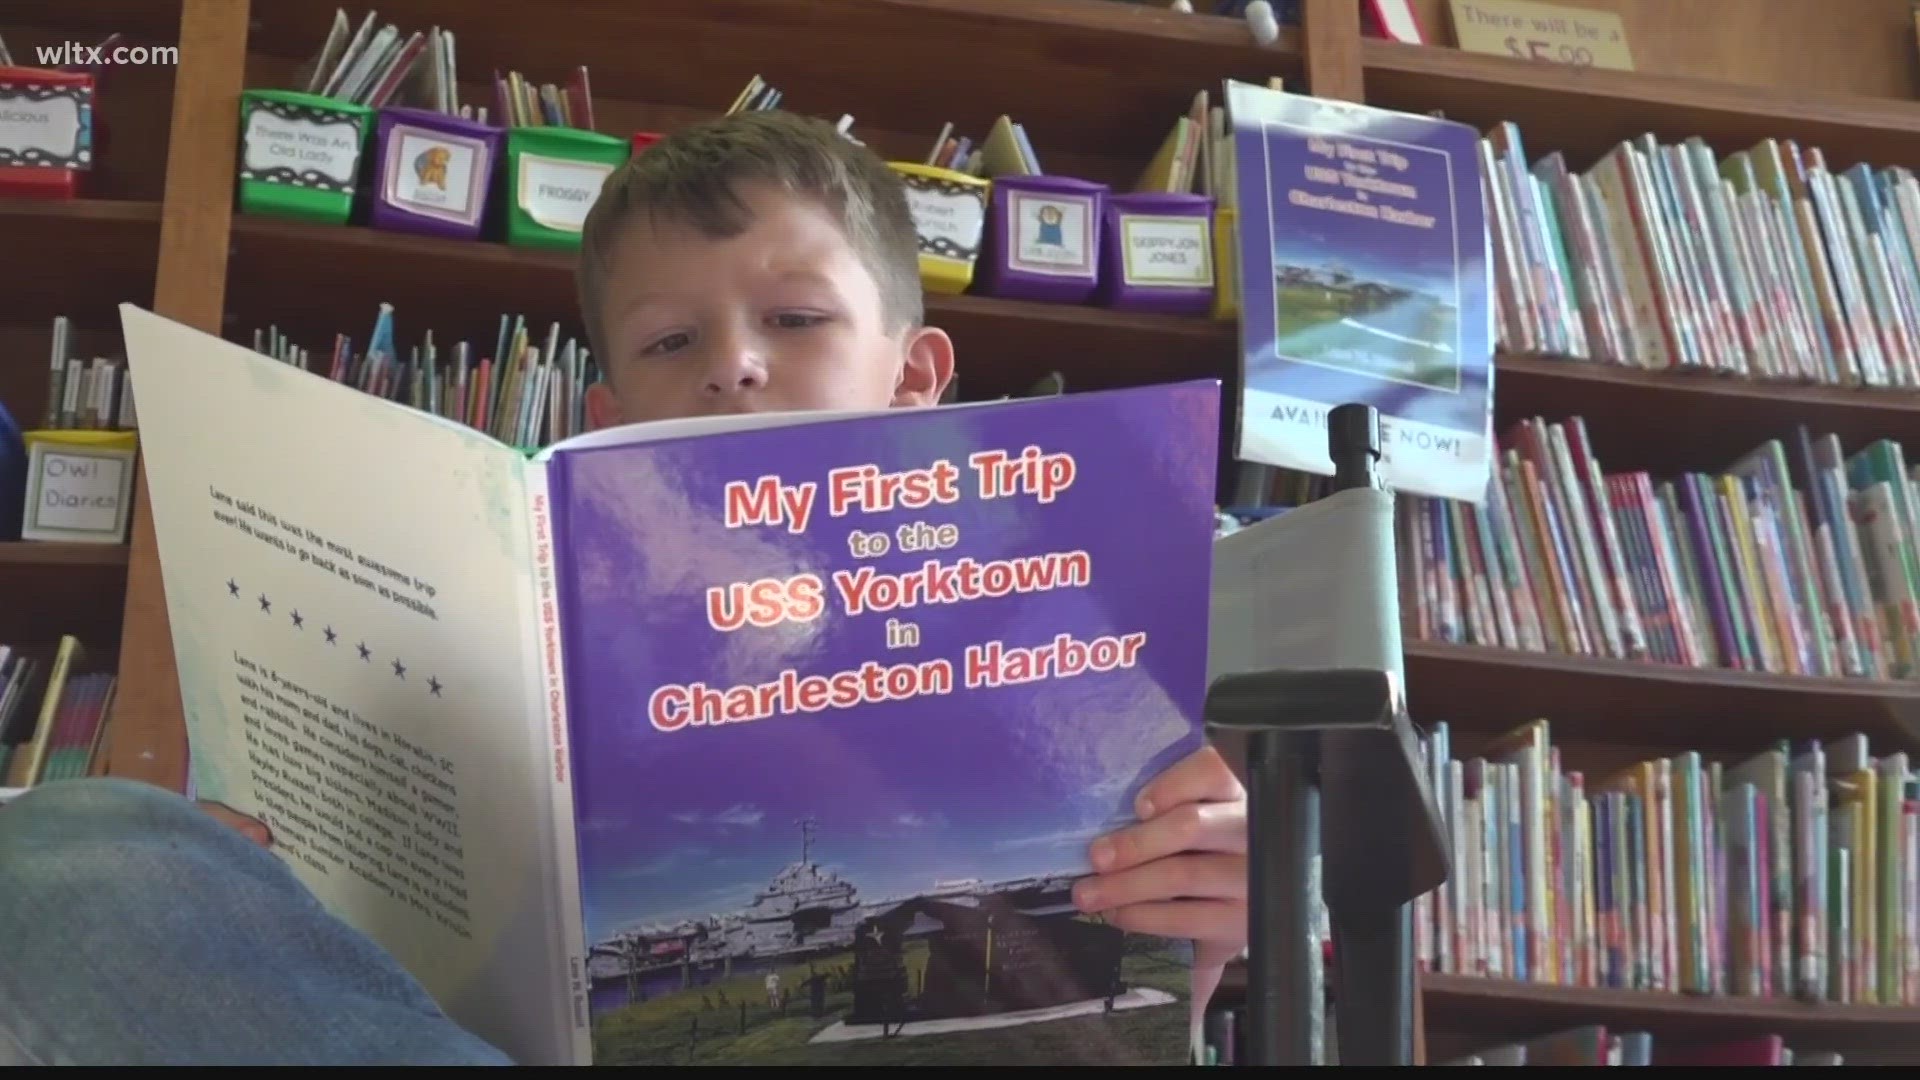 Lane Russell is a published author all because his grandparents took him on a trip to the USS Yorktown.